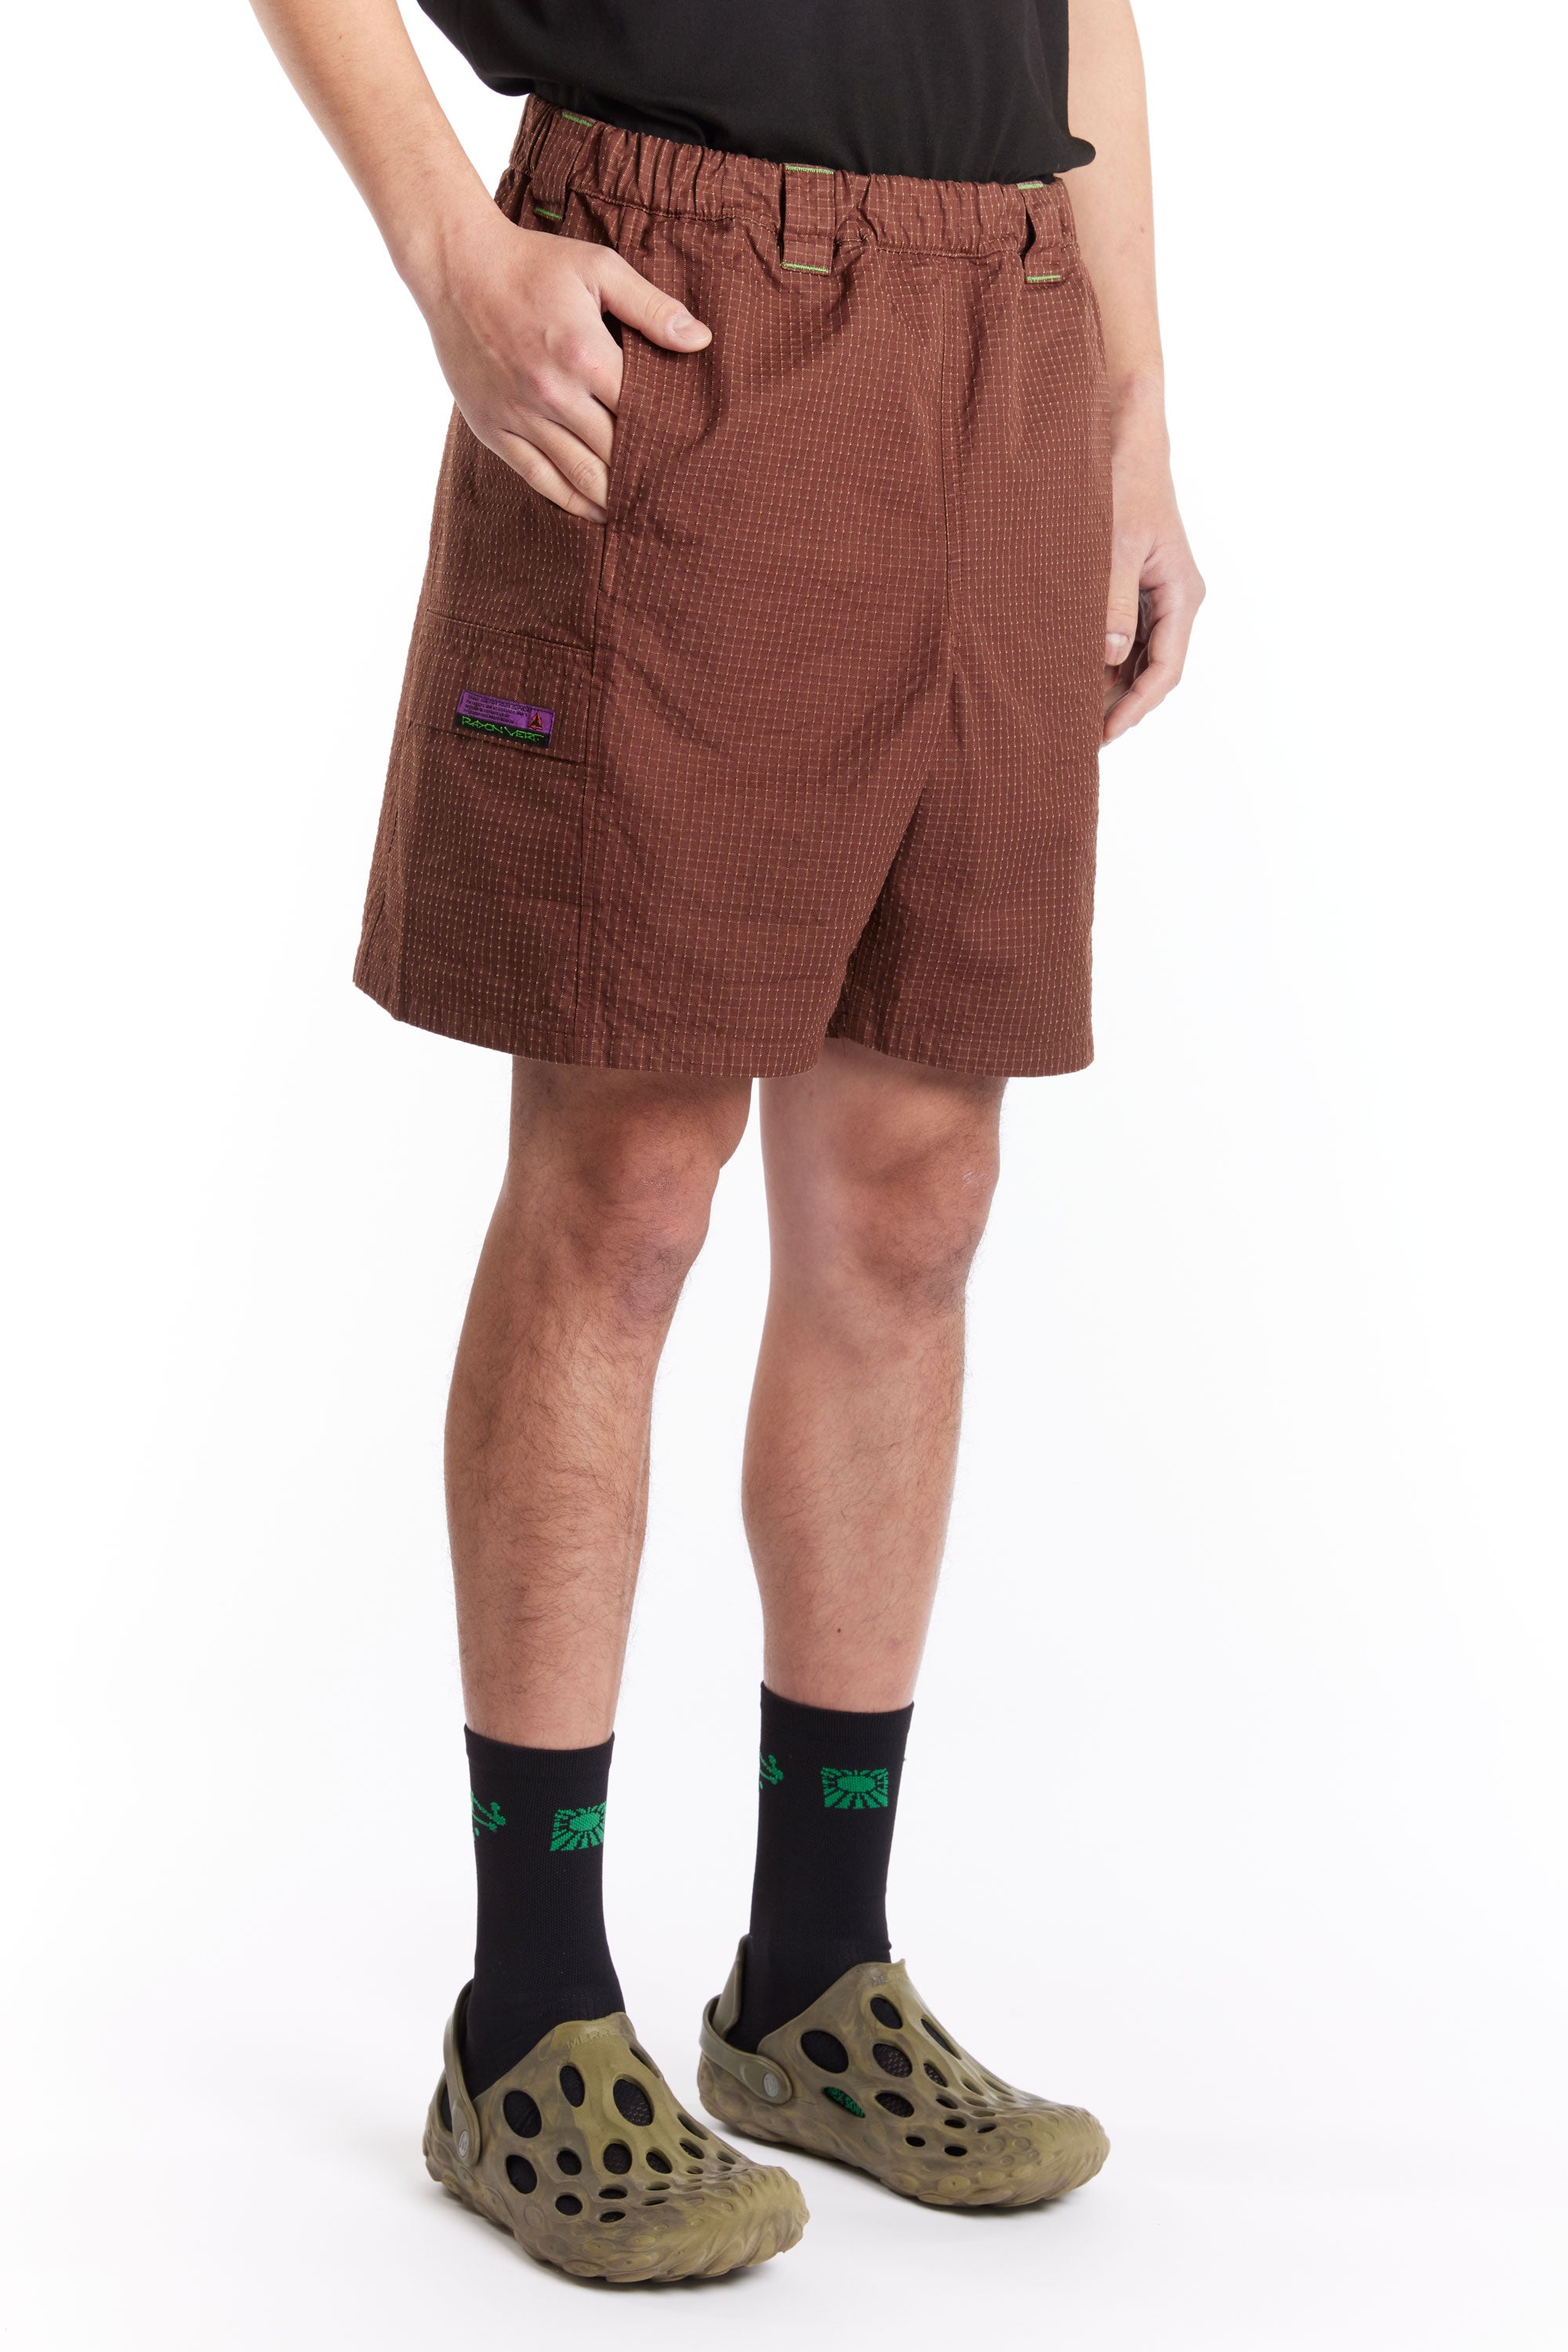 The RAYON VERT - FURIO SHORTS GRAVEYARD BROWN available online with global shipping, and in PAM Stores Melbourne and Sydney.